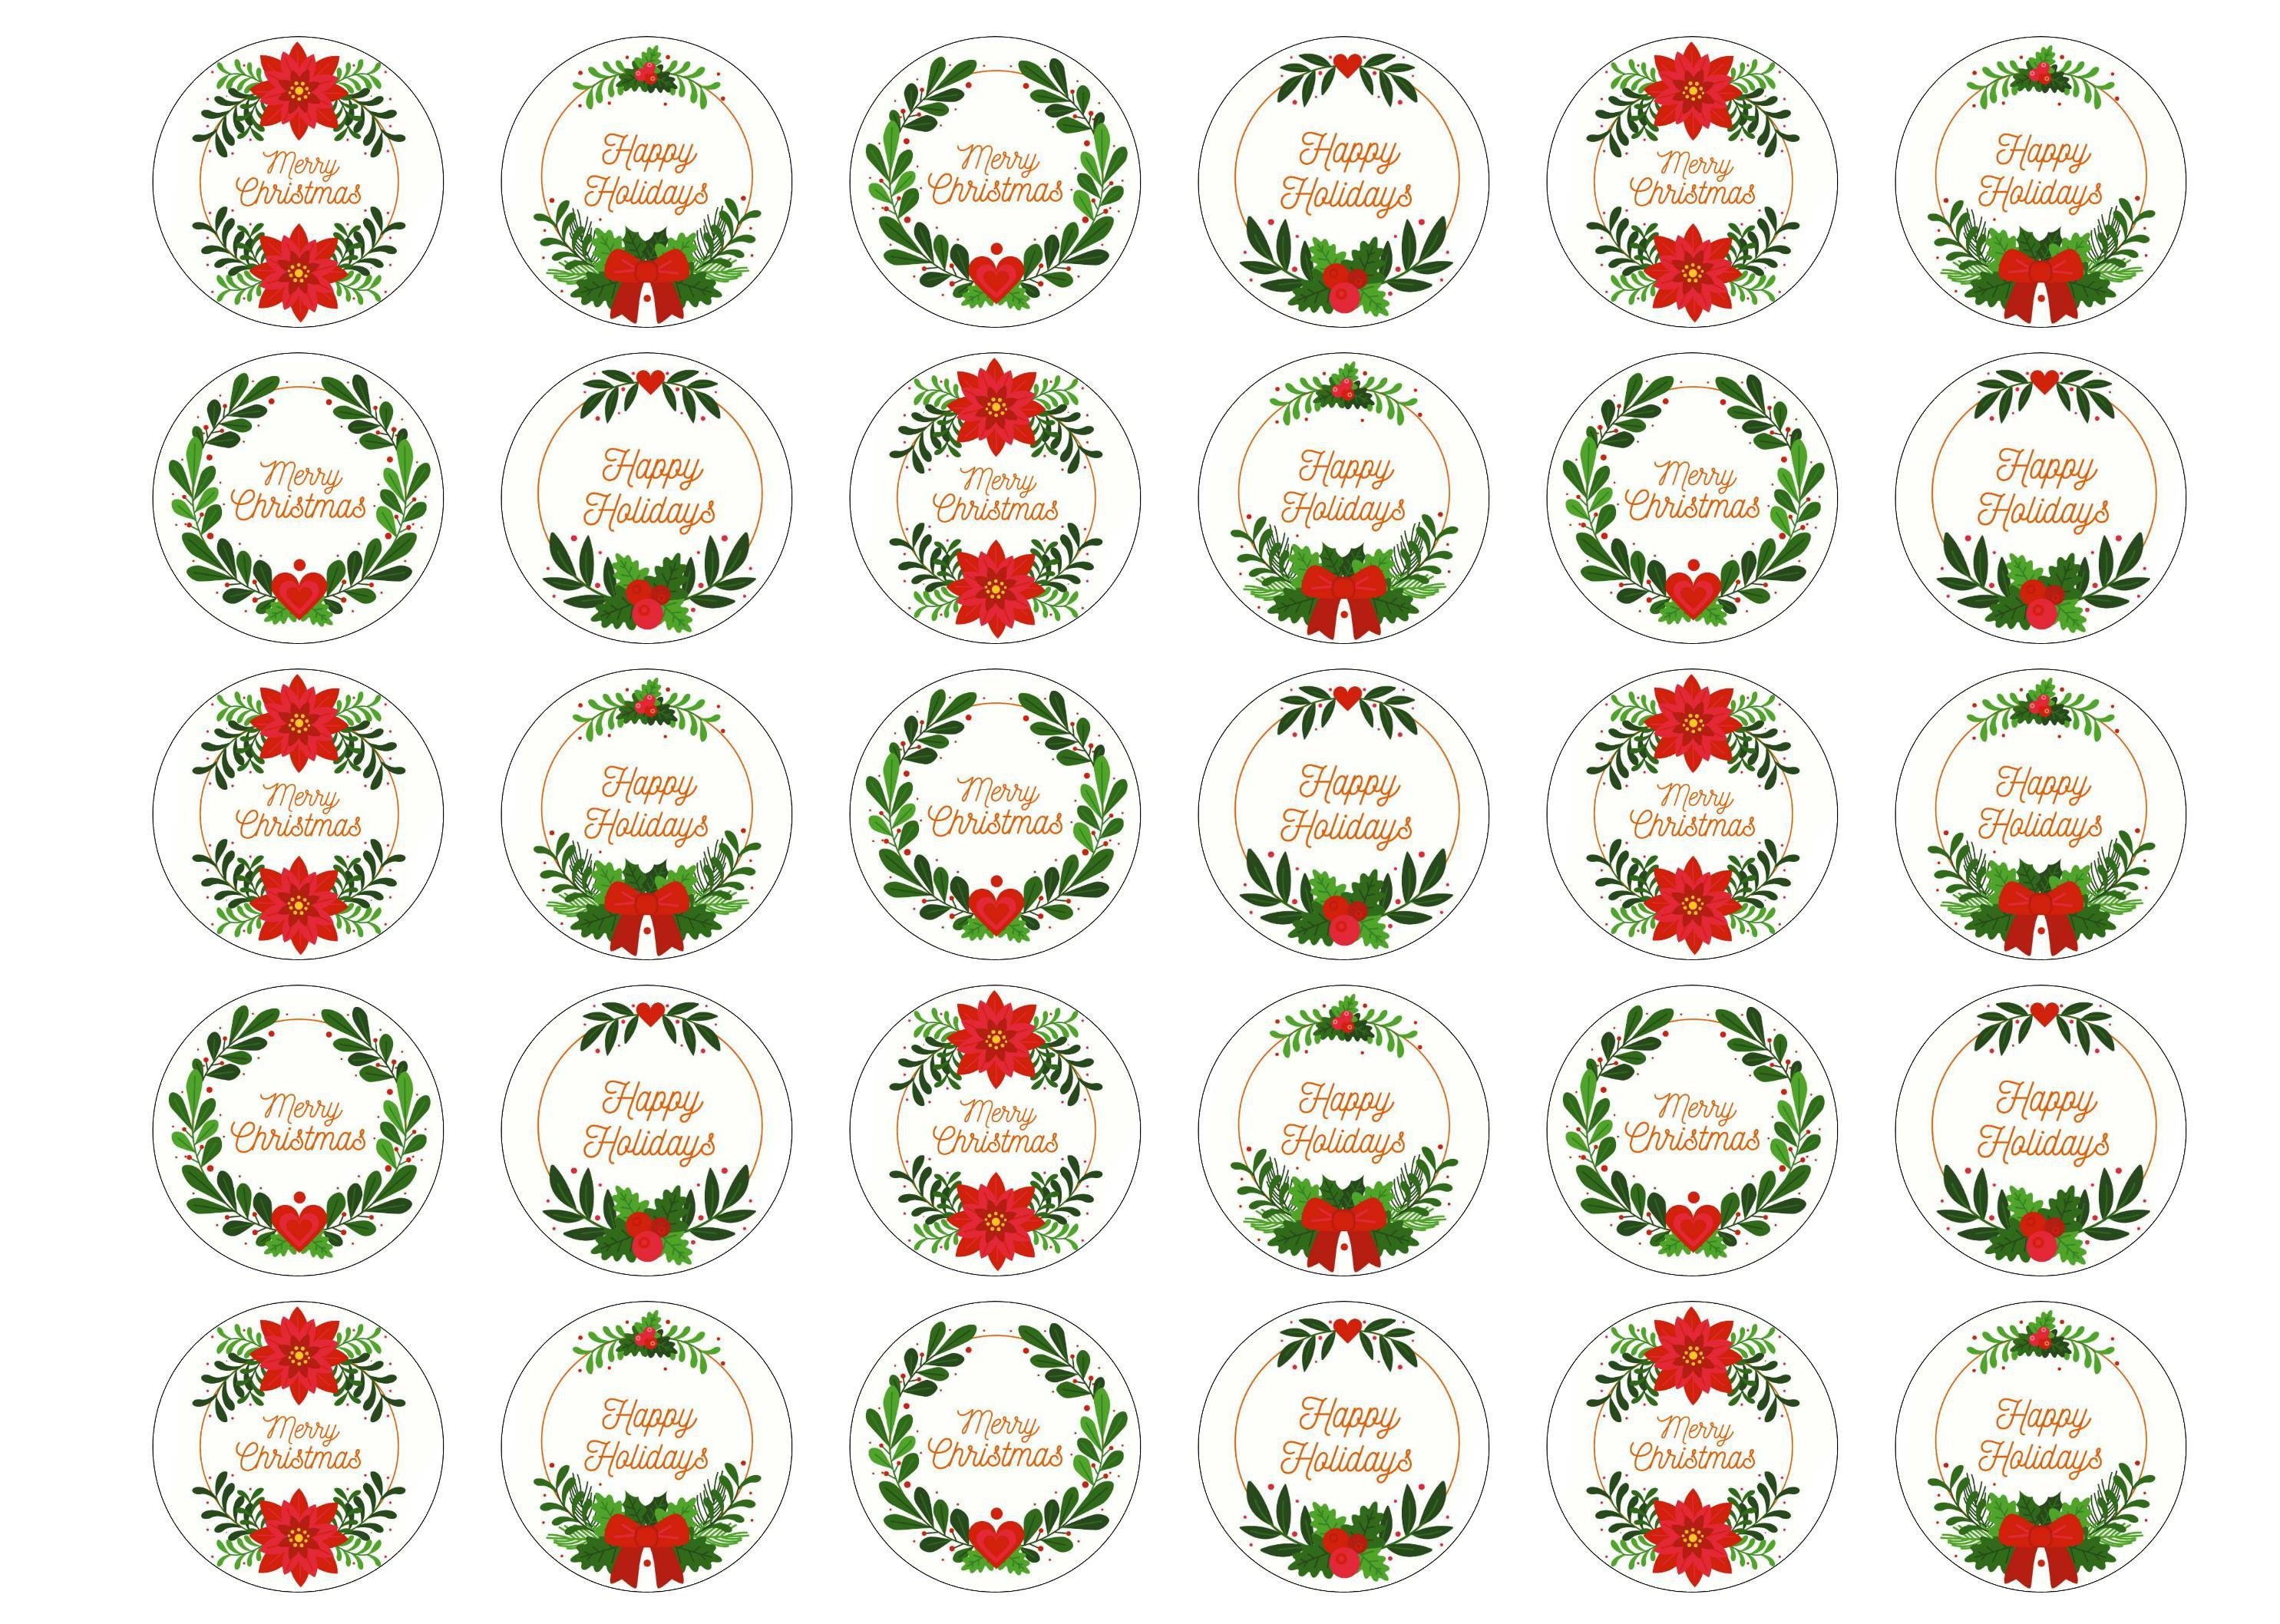 30 edible toppers with Christmas Wreath images